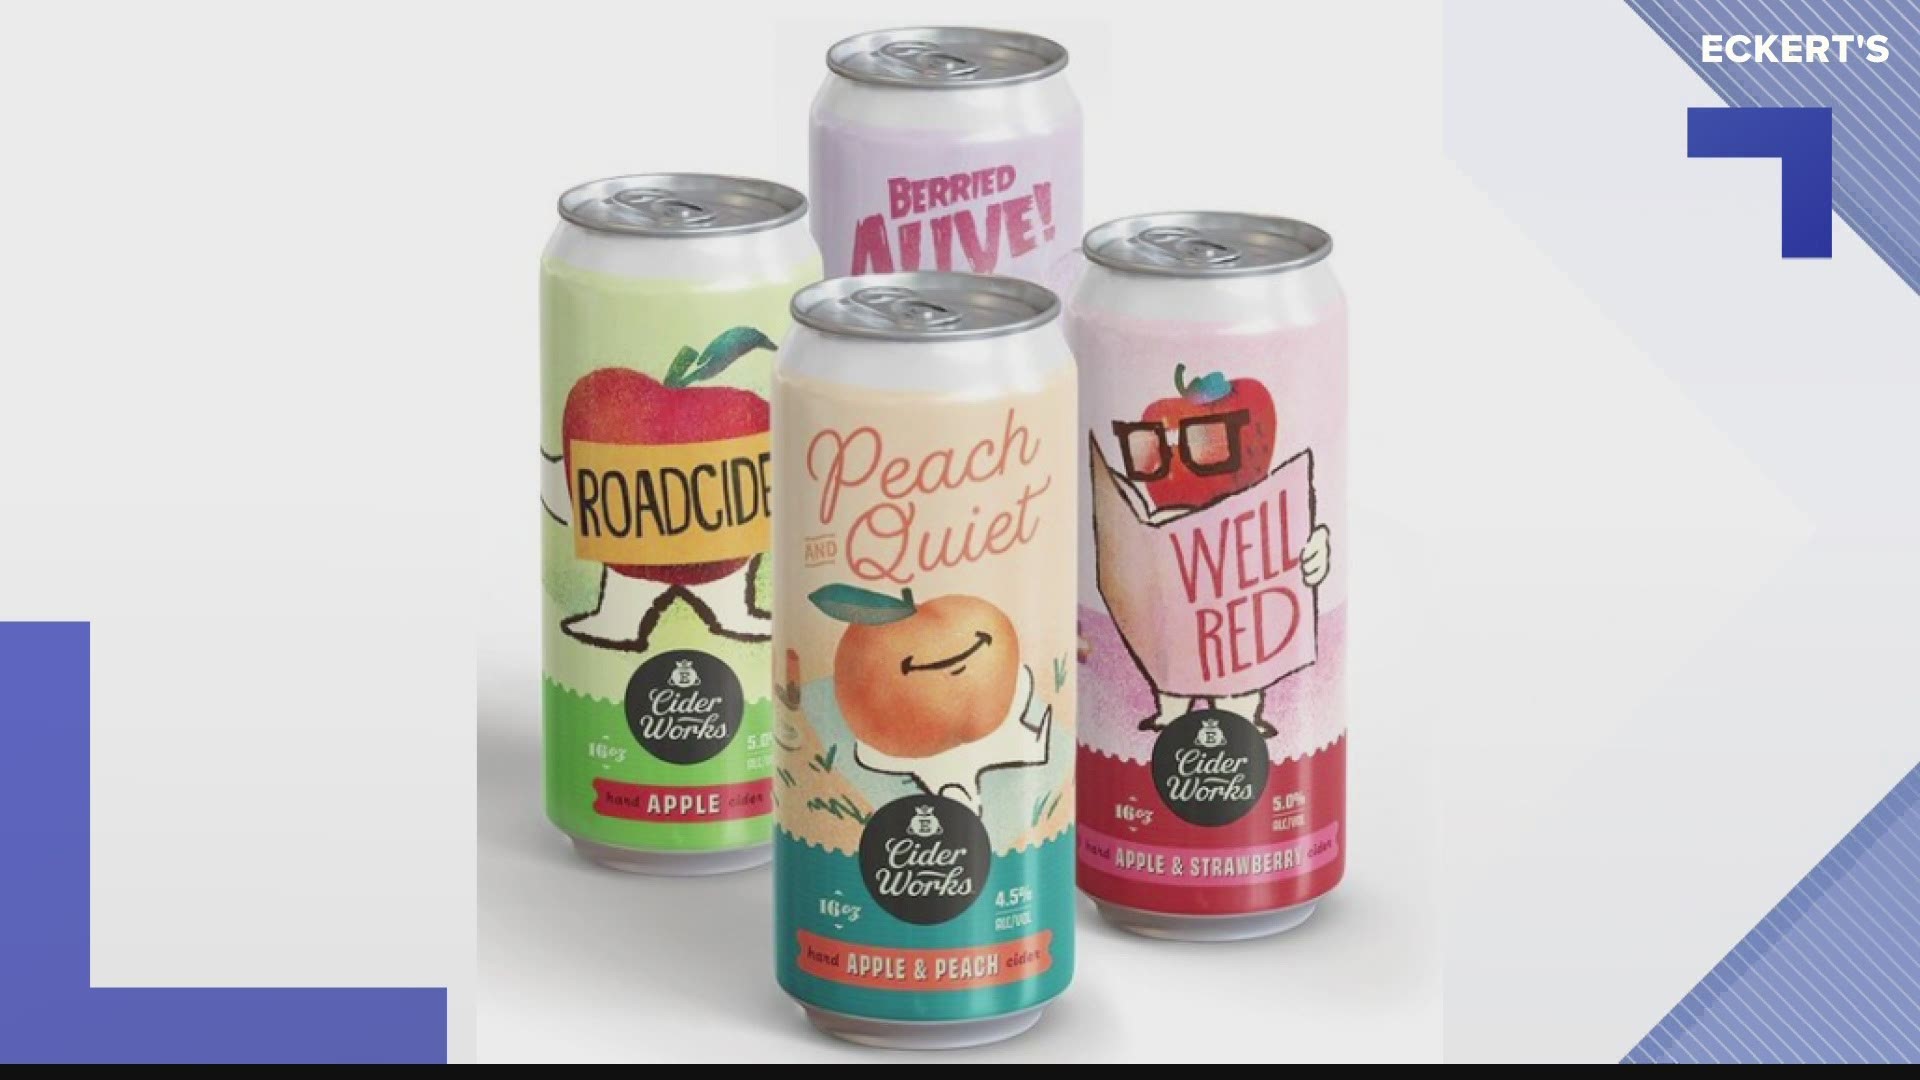 Each flavor is available at Eckert’s Country Store and can be purchased in 4-packs of 16-ounce cans